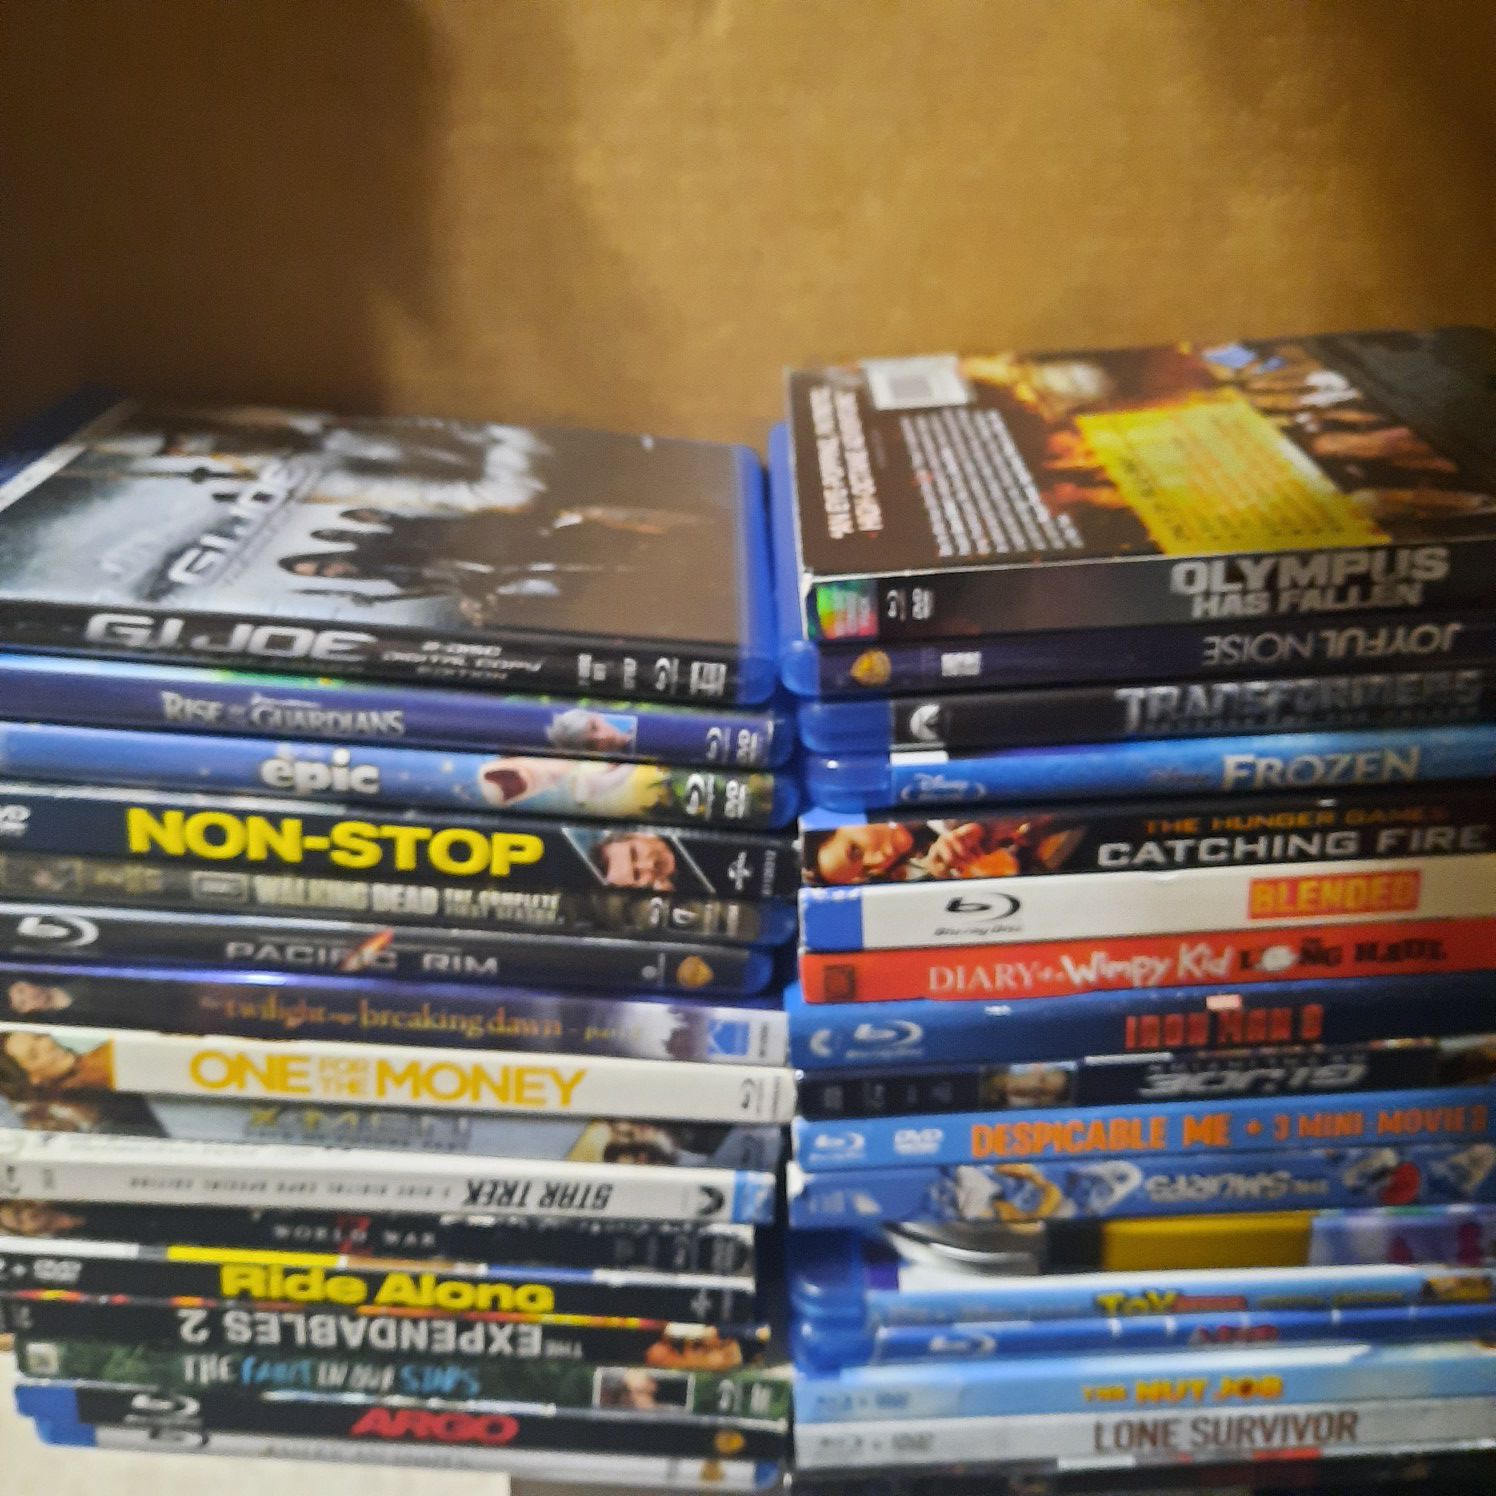 30 blu ray movie epic frozen toy story argo movies wholesale lot